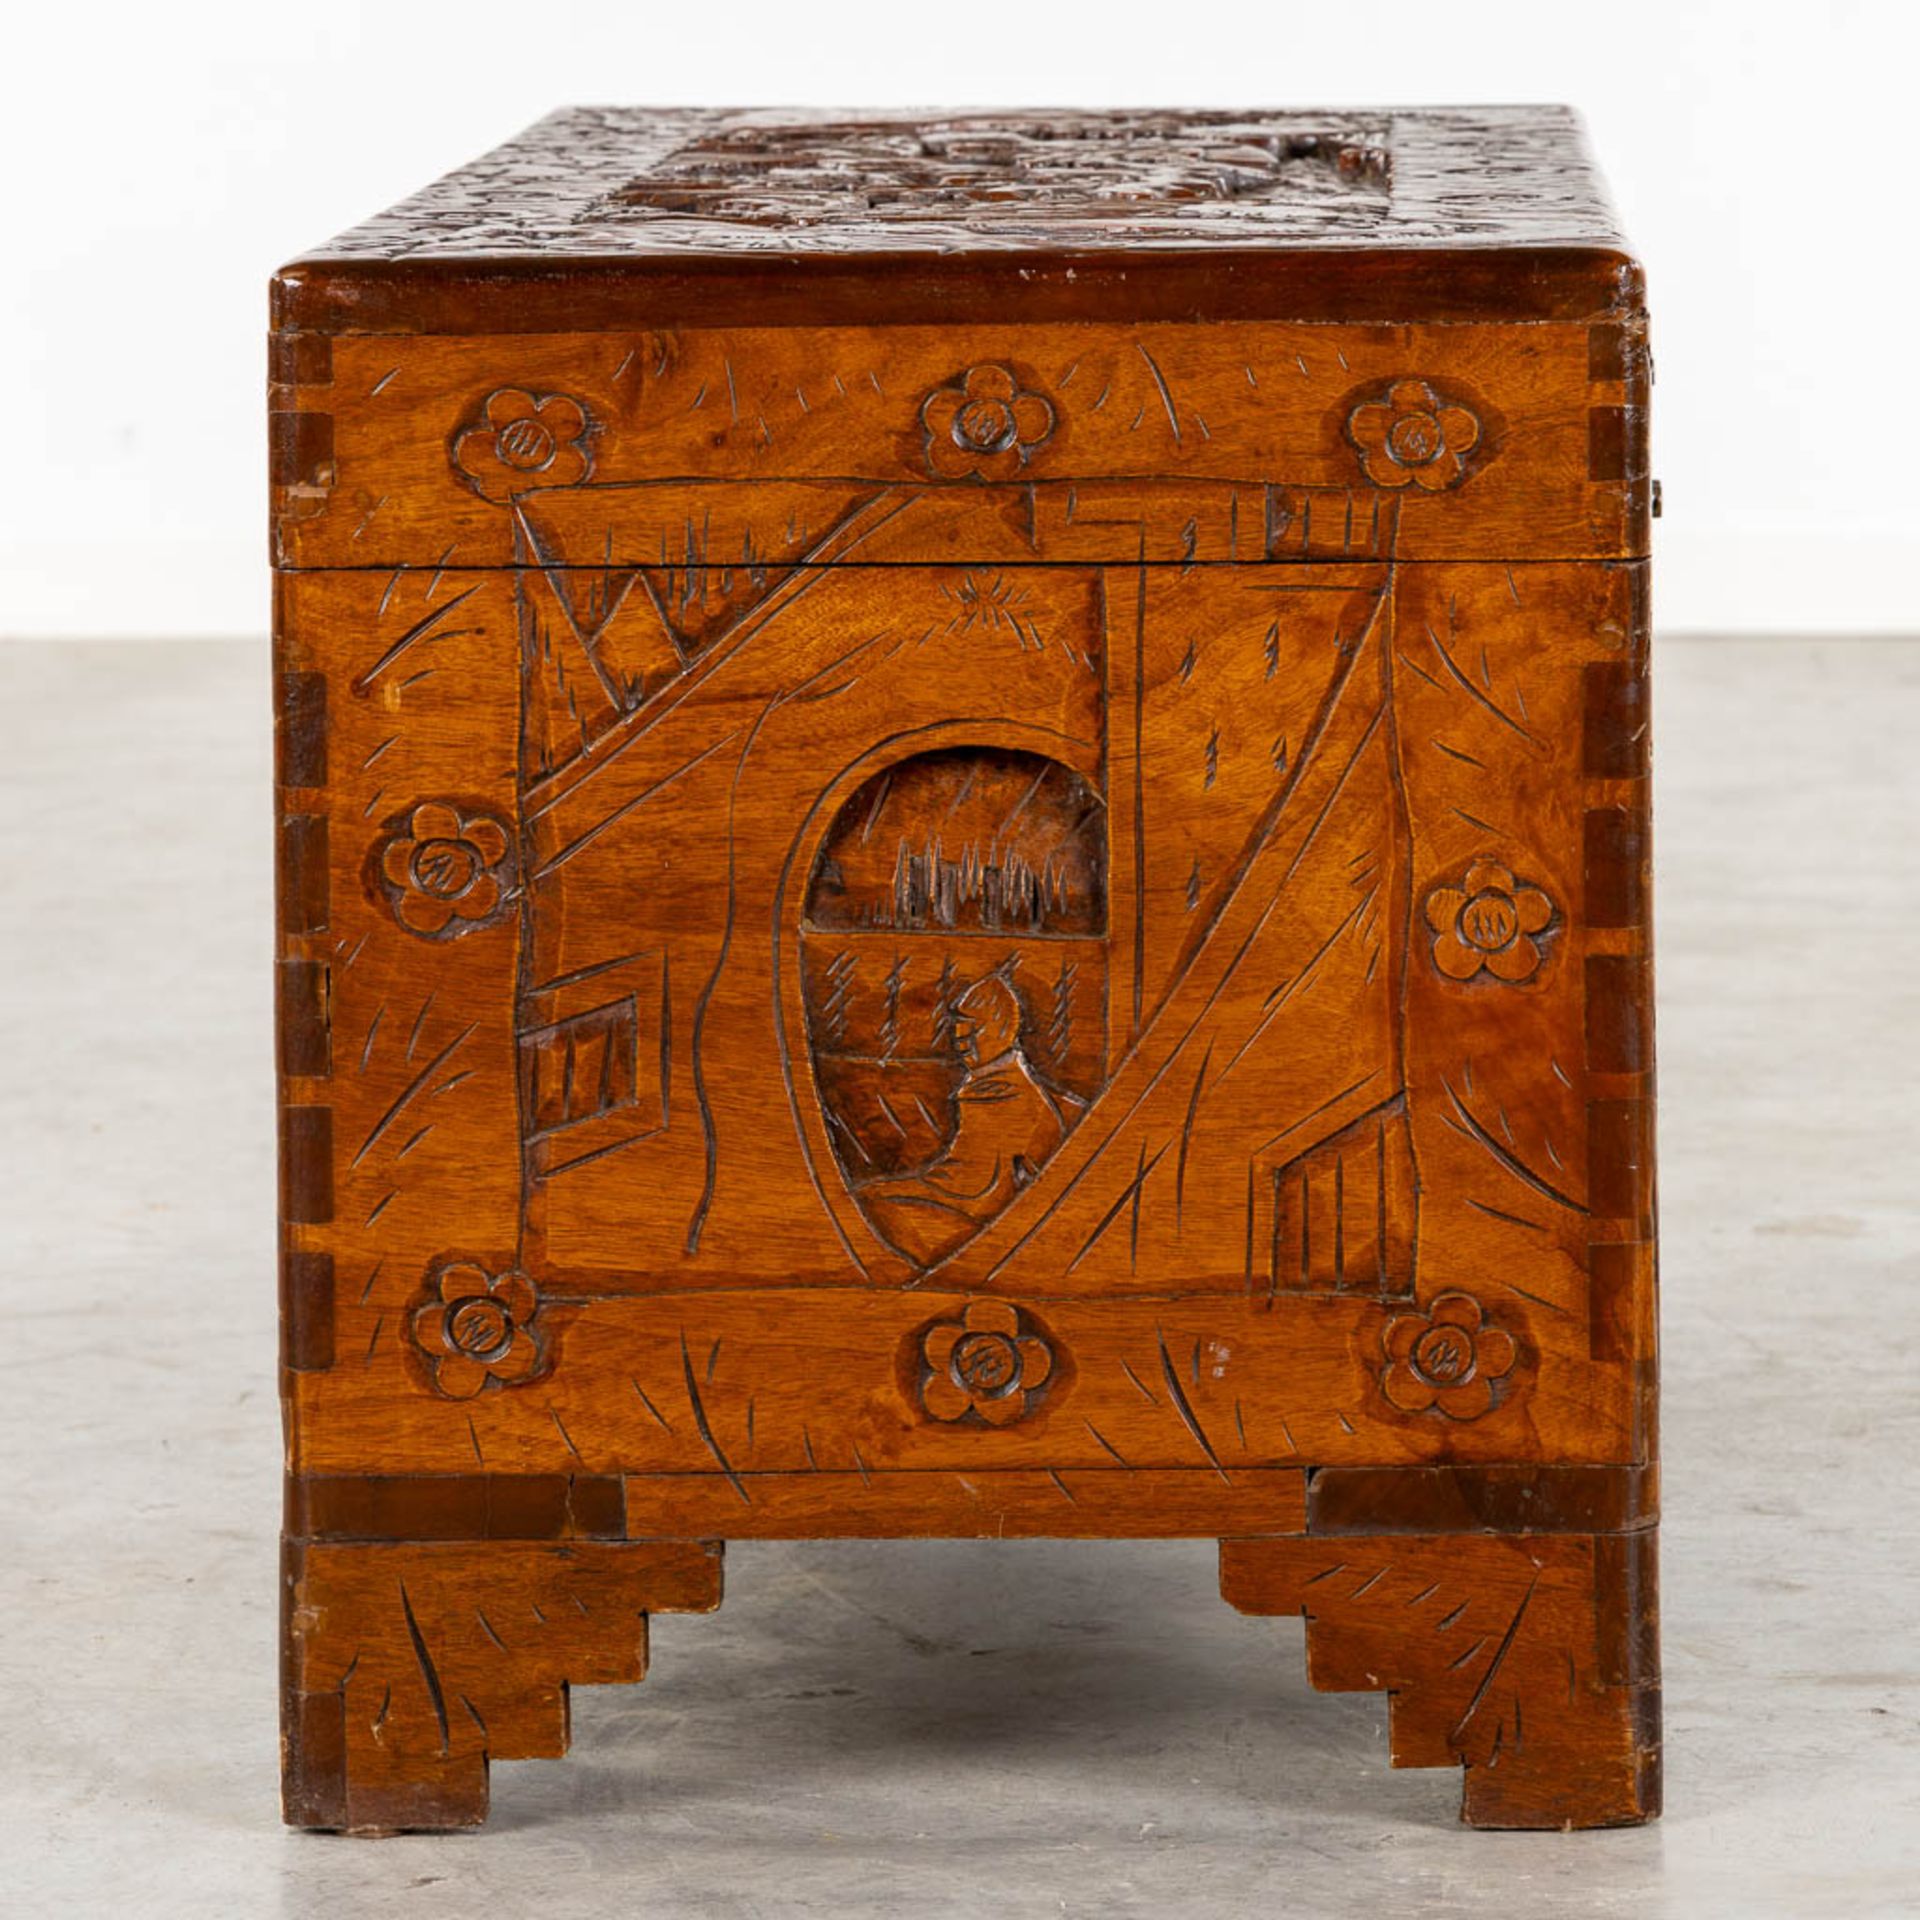 Two Oriental chests, tropical hardwood. Probably Myanmar. (L:50 x W:102 x H:60 cm) - Image 14 of 21